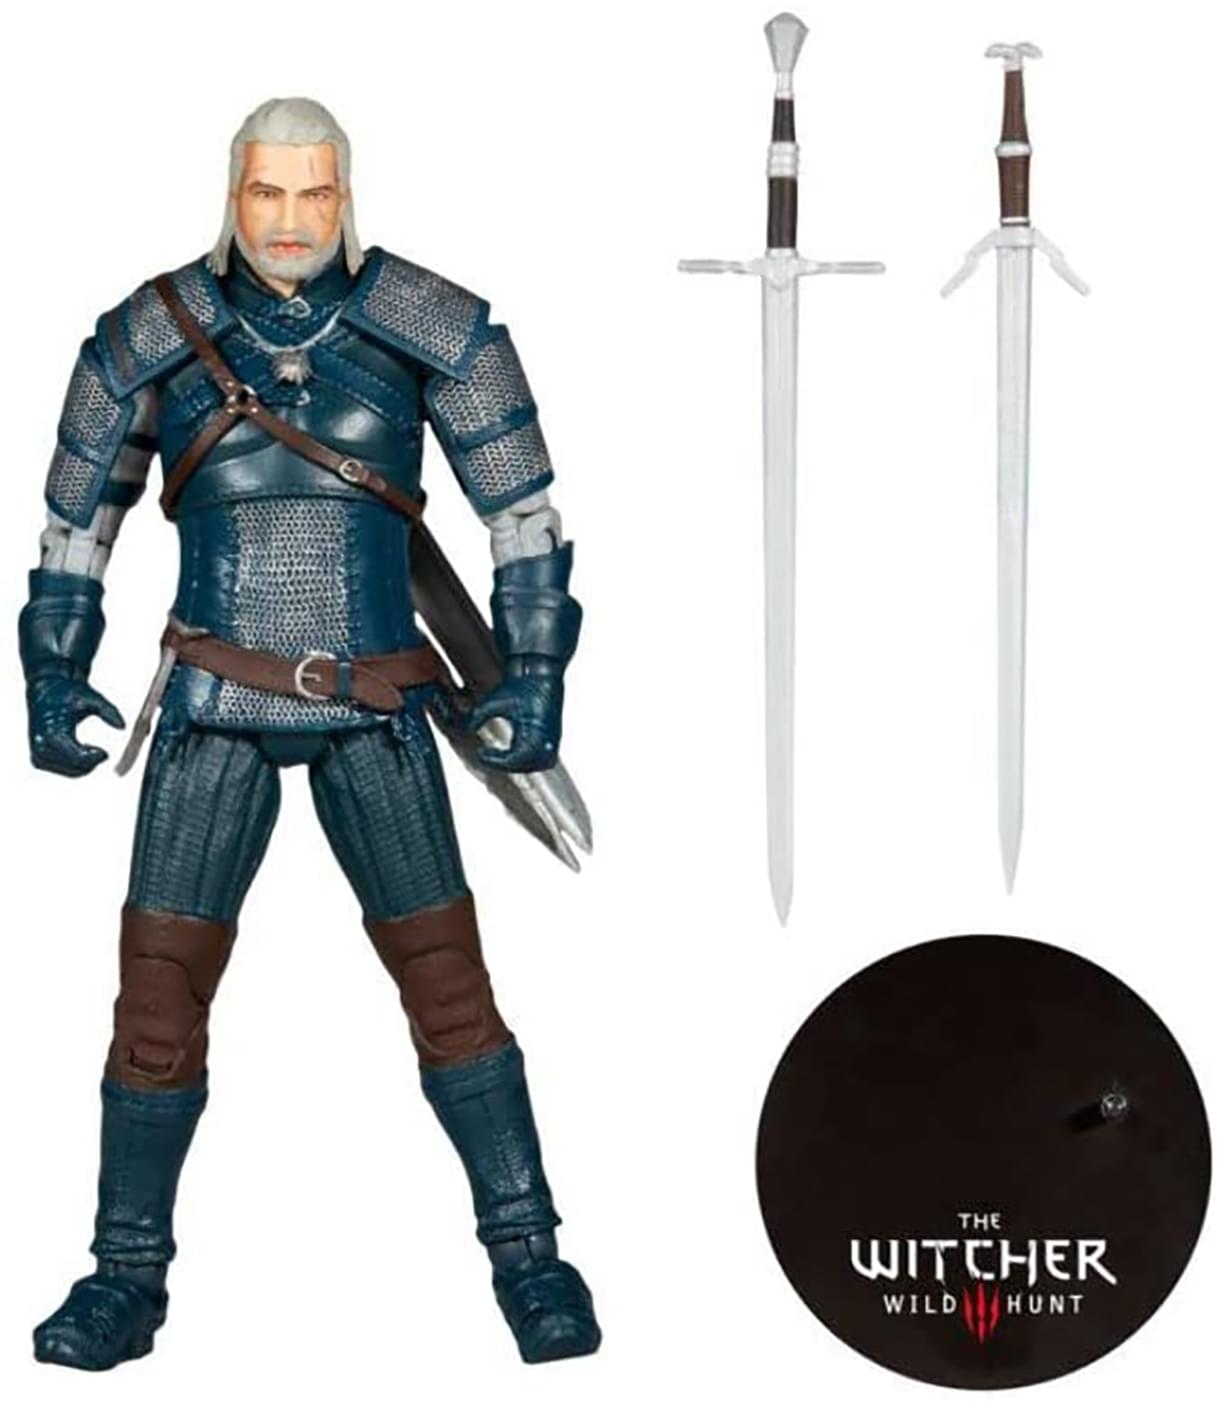 The Witcher 7 Inch Action Figure , Geralt Of Rivia (Viper Armor: Teal)